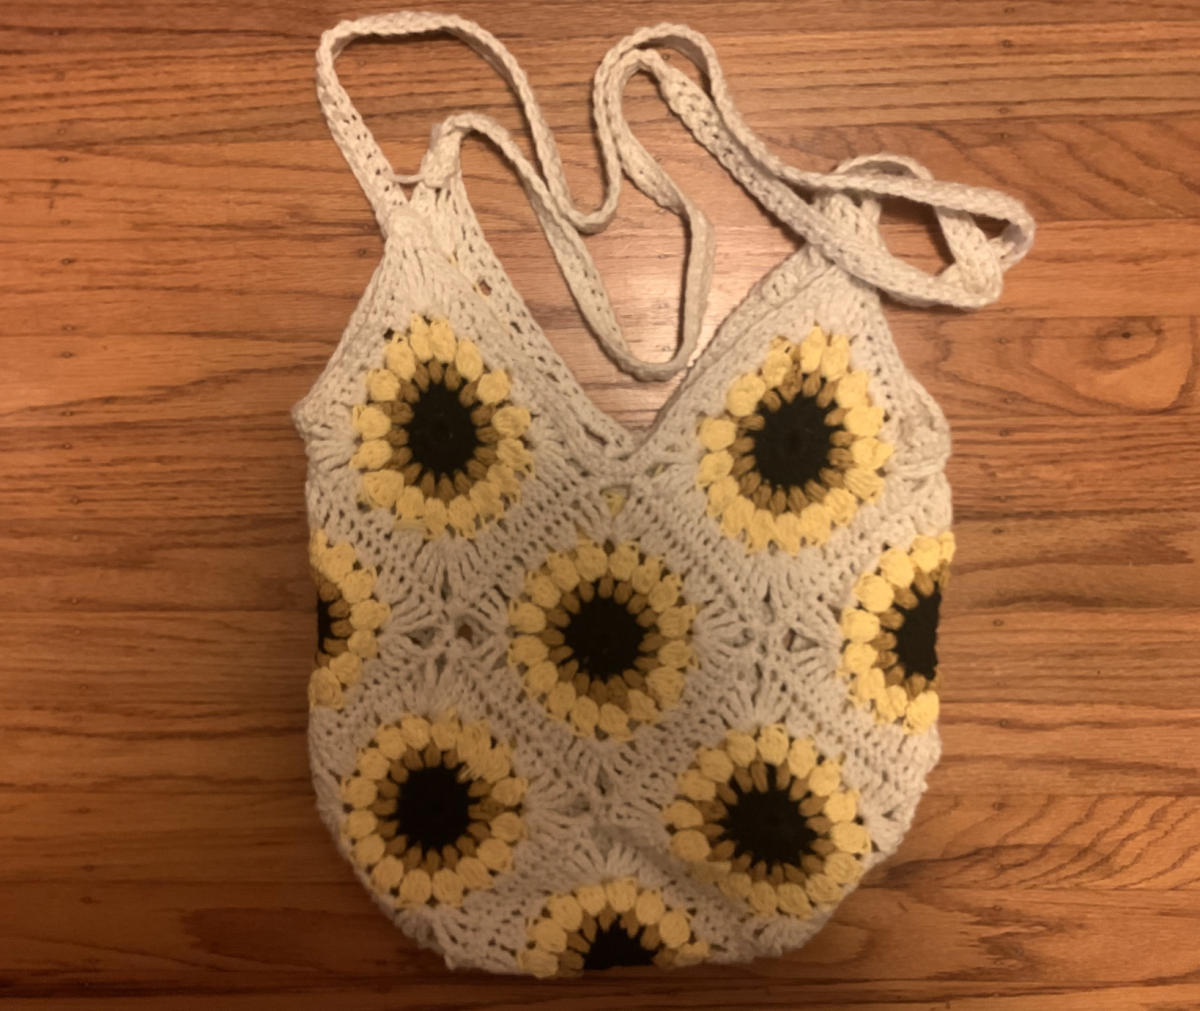 Tote bags can be made by crocheting sunflower granny squares together.